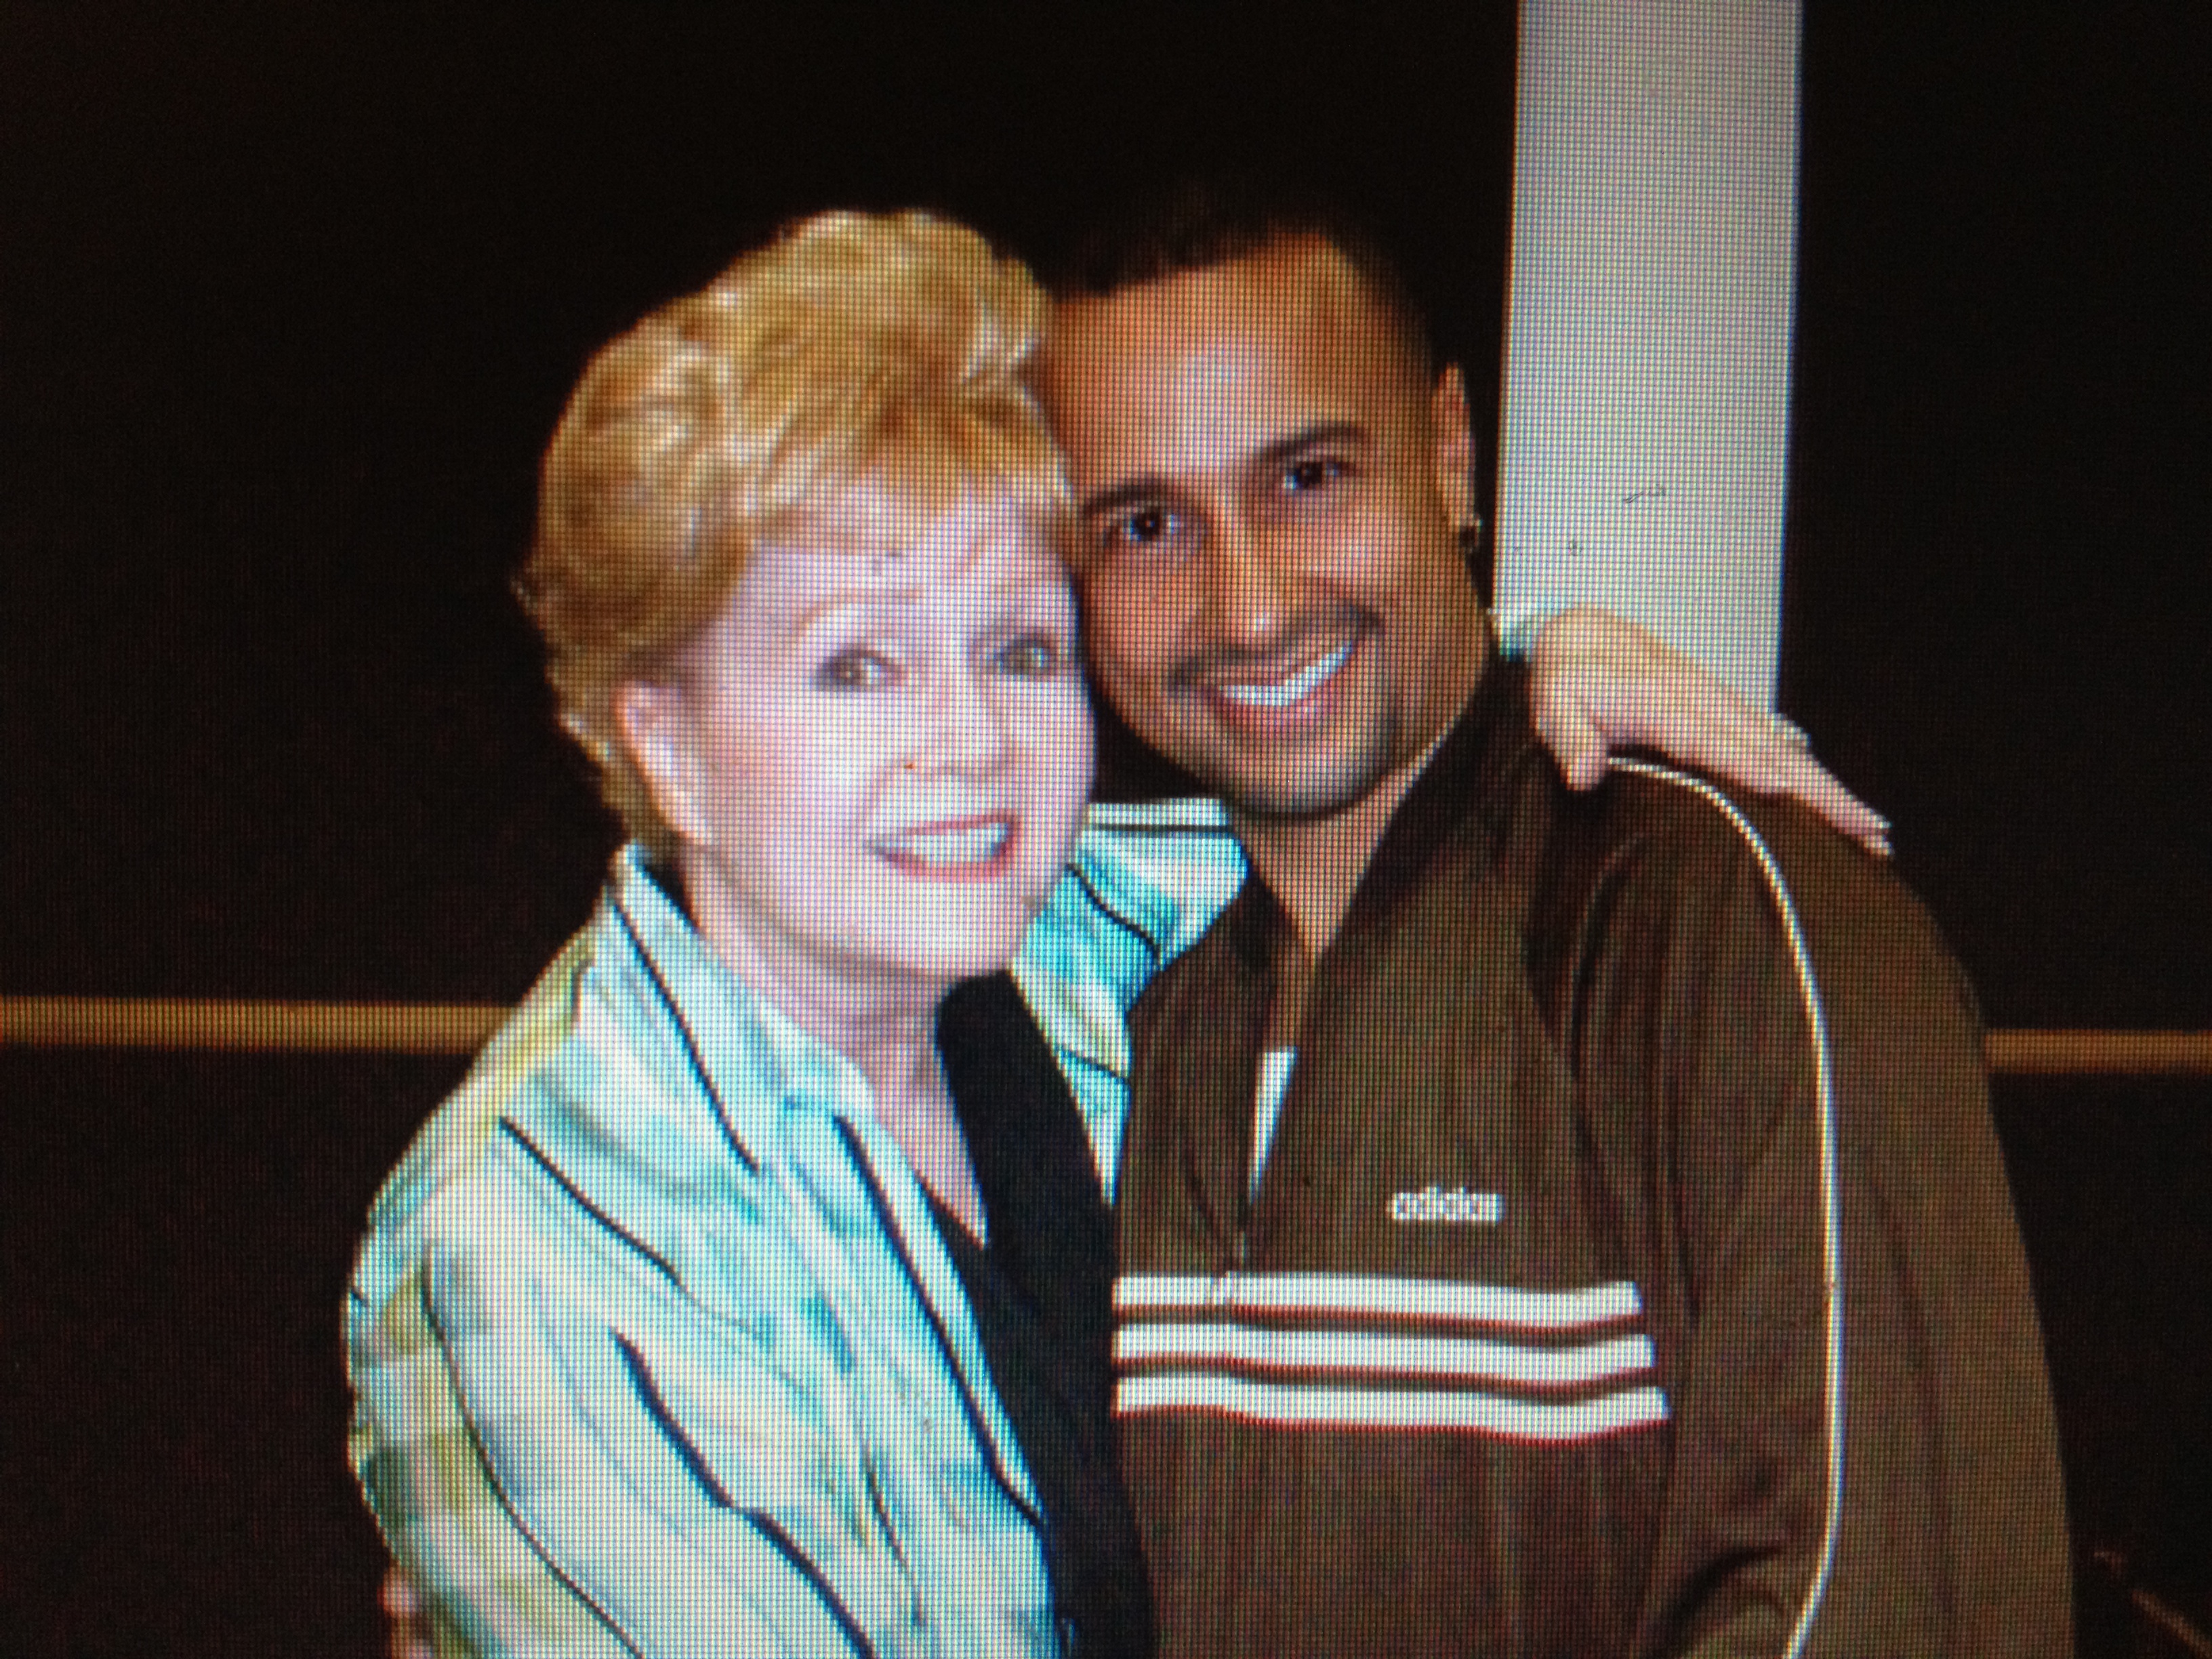 Chuck Maldonado and Actress/Singer/Dancer Debbie Reynolds during rehearsal for one of her stage shows that Chuck Maldonado choreographed